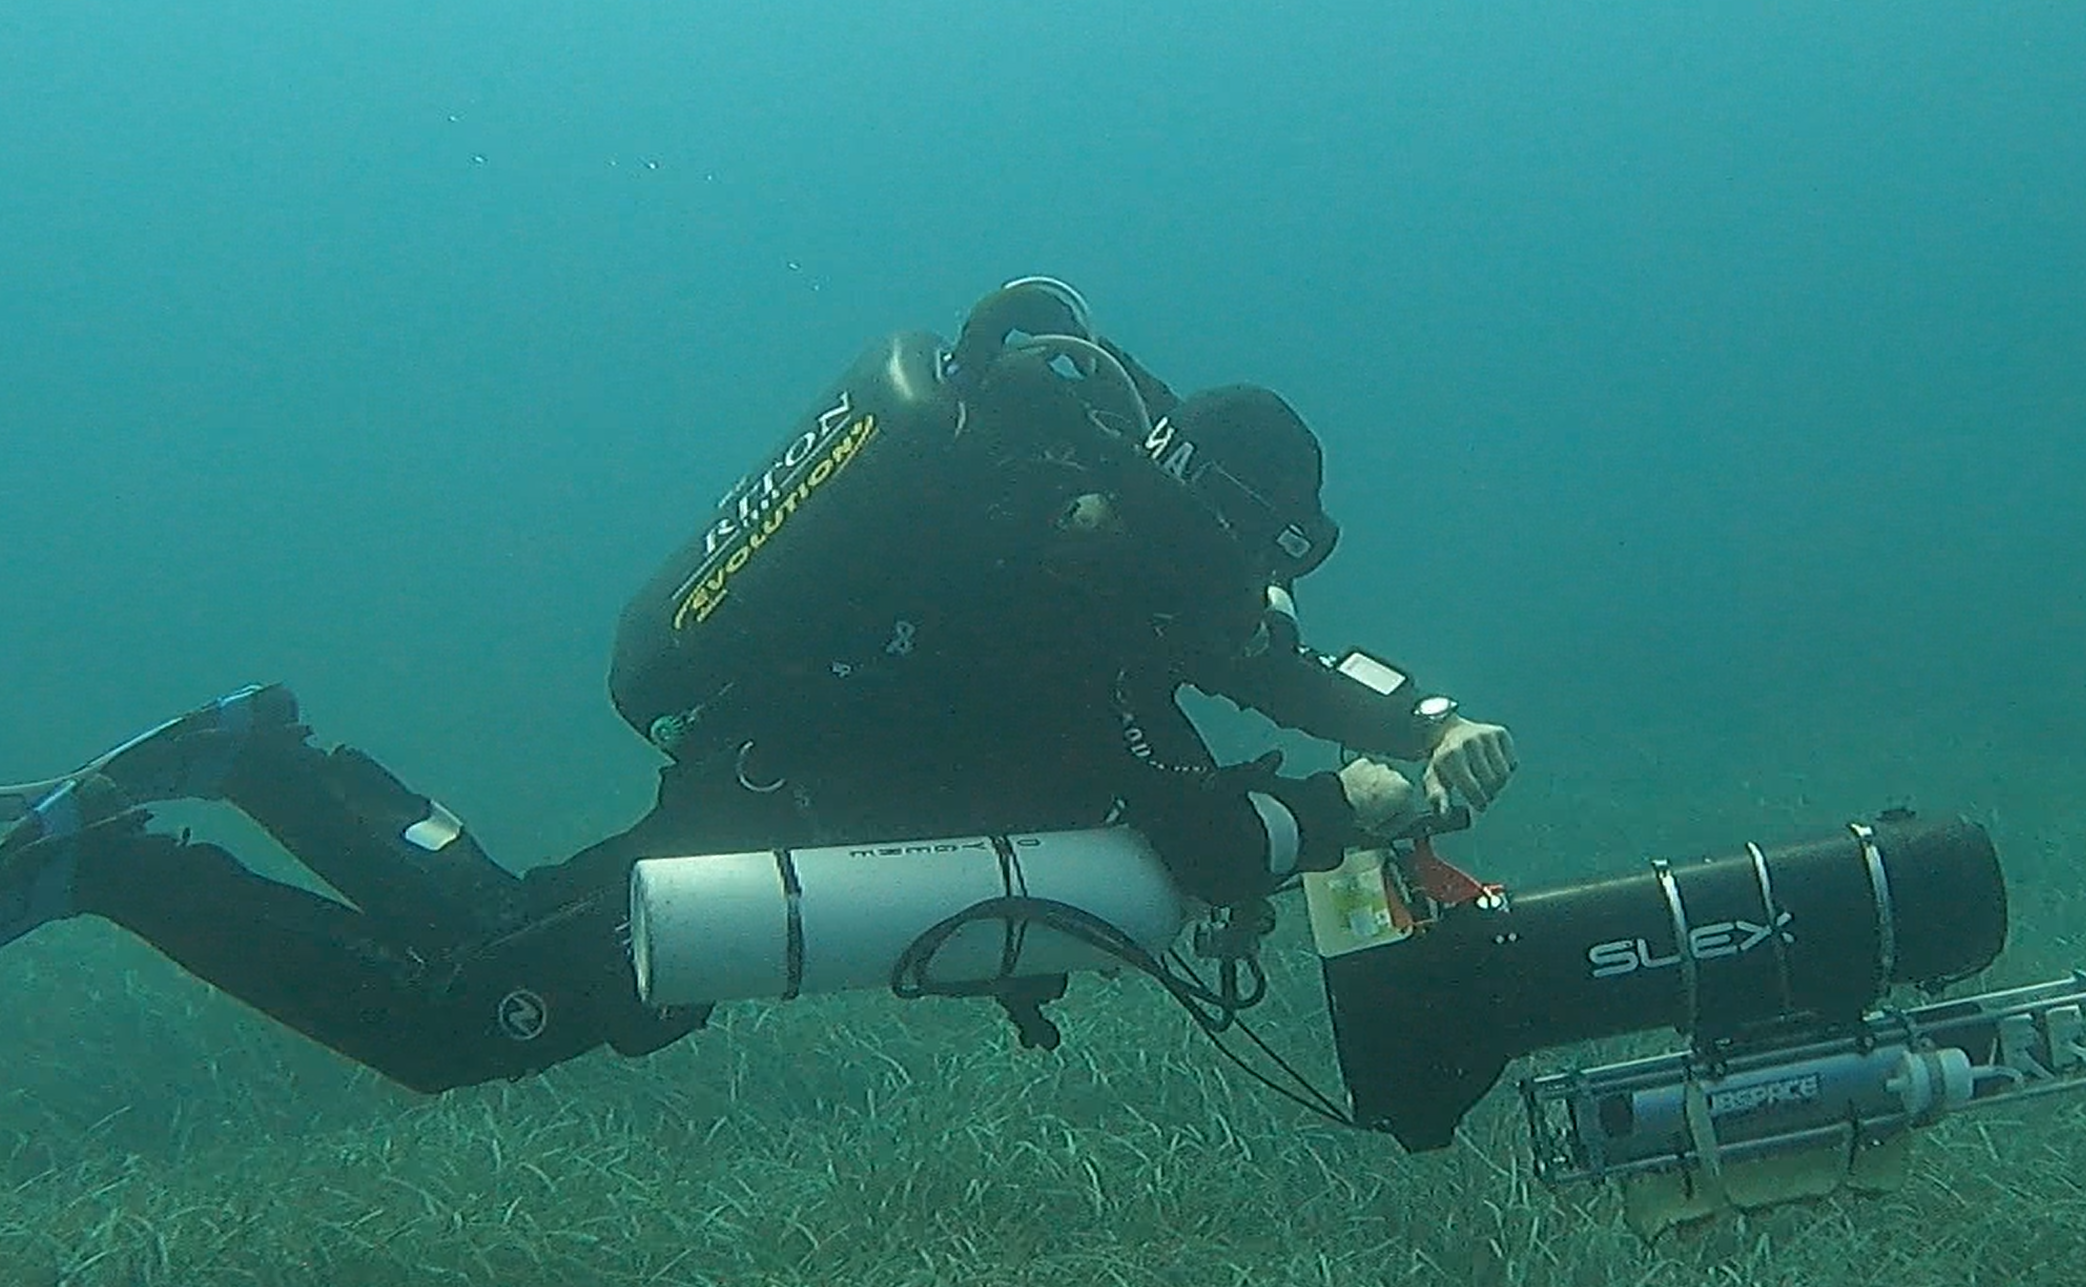 Development of a new monitoring protocols to assess the biodiversity in Marine Protected Areas: environmental DNA sampling by a diver.